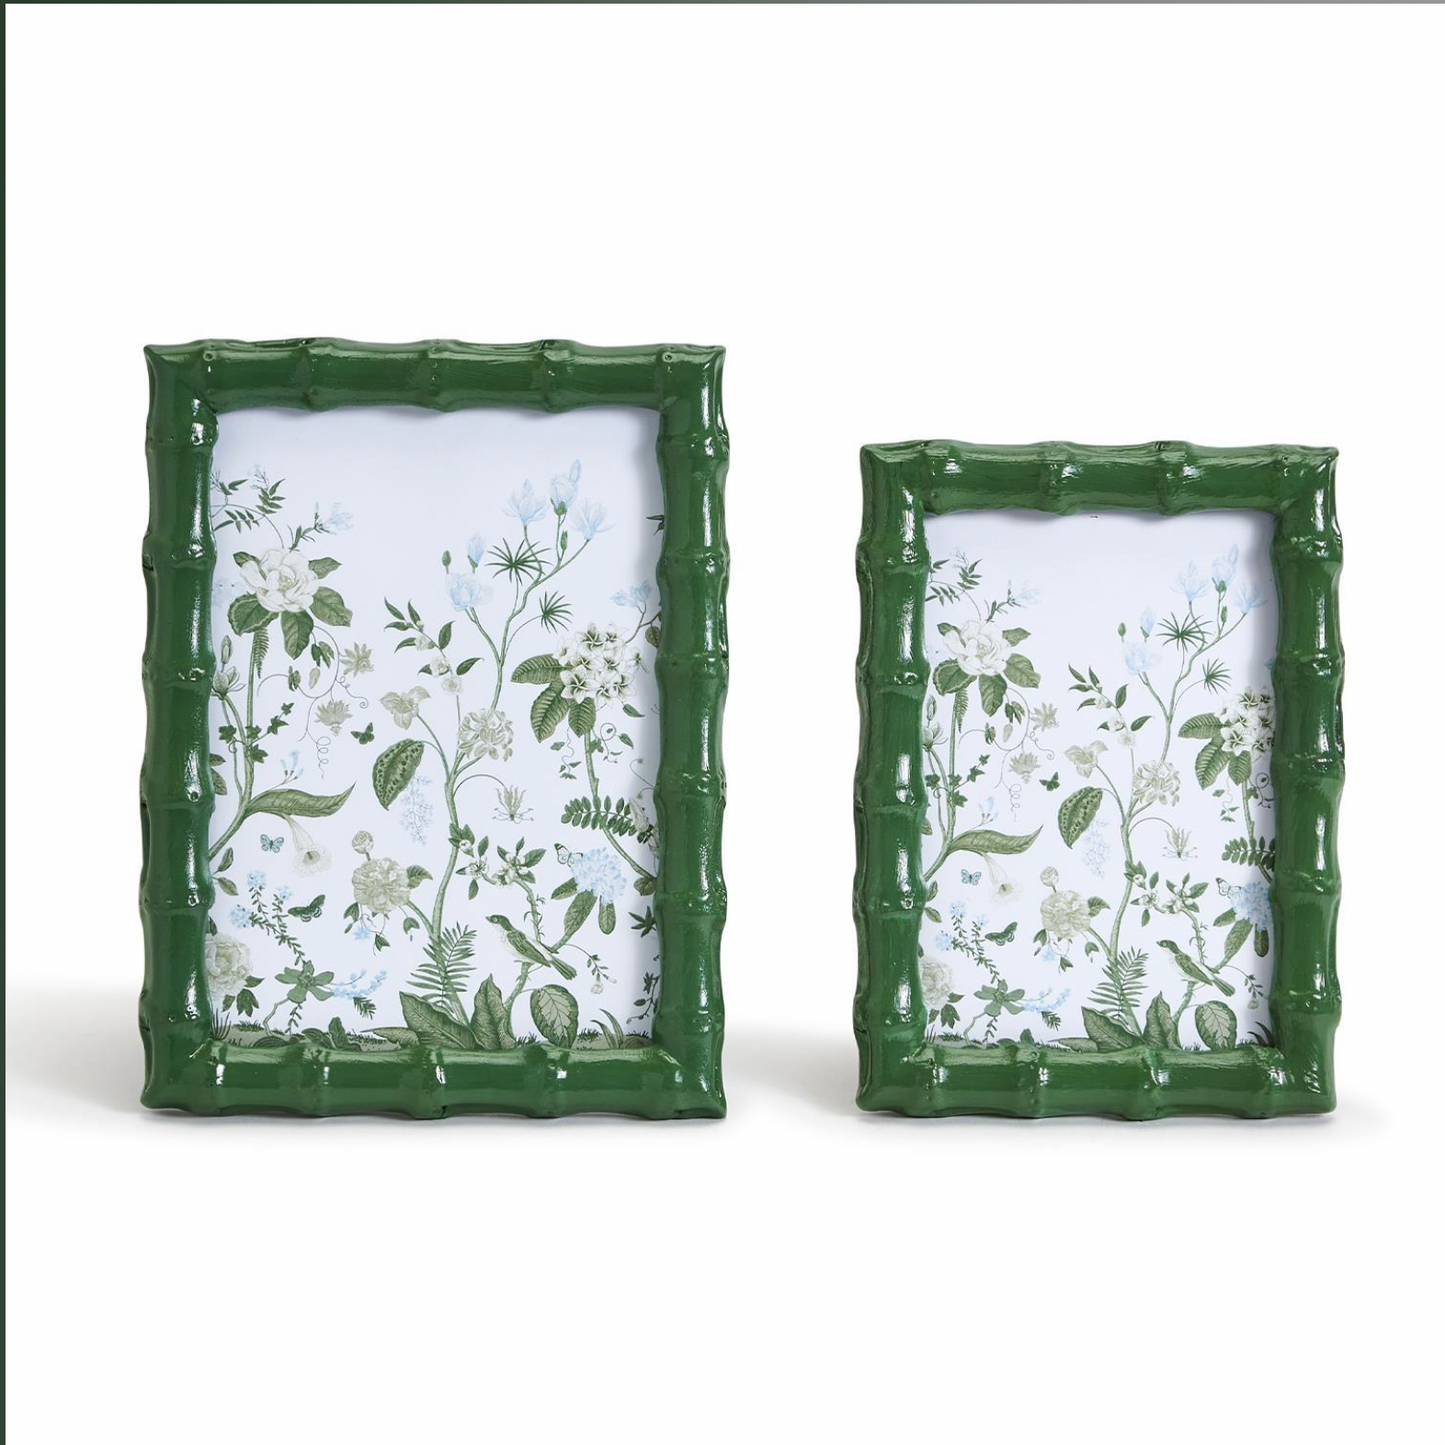 Green bamboo picture frames